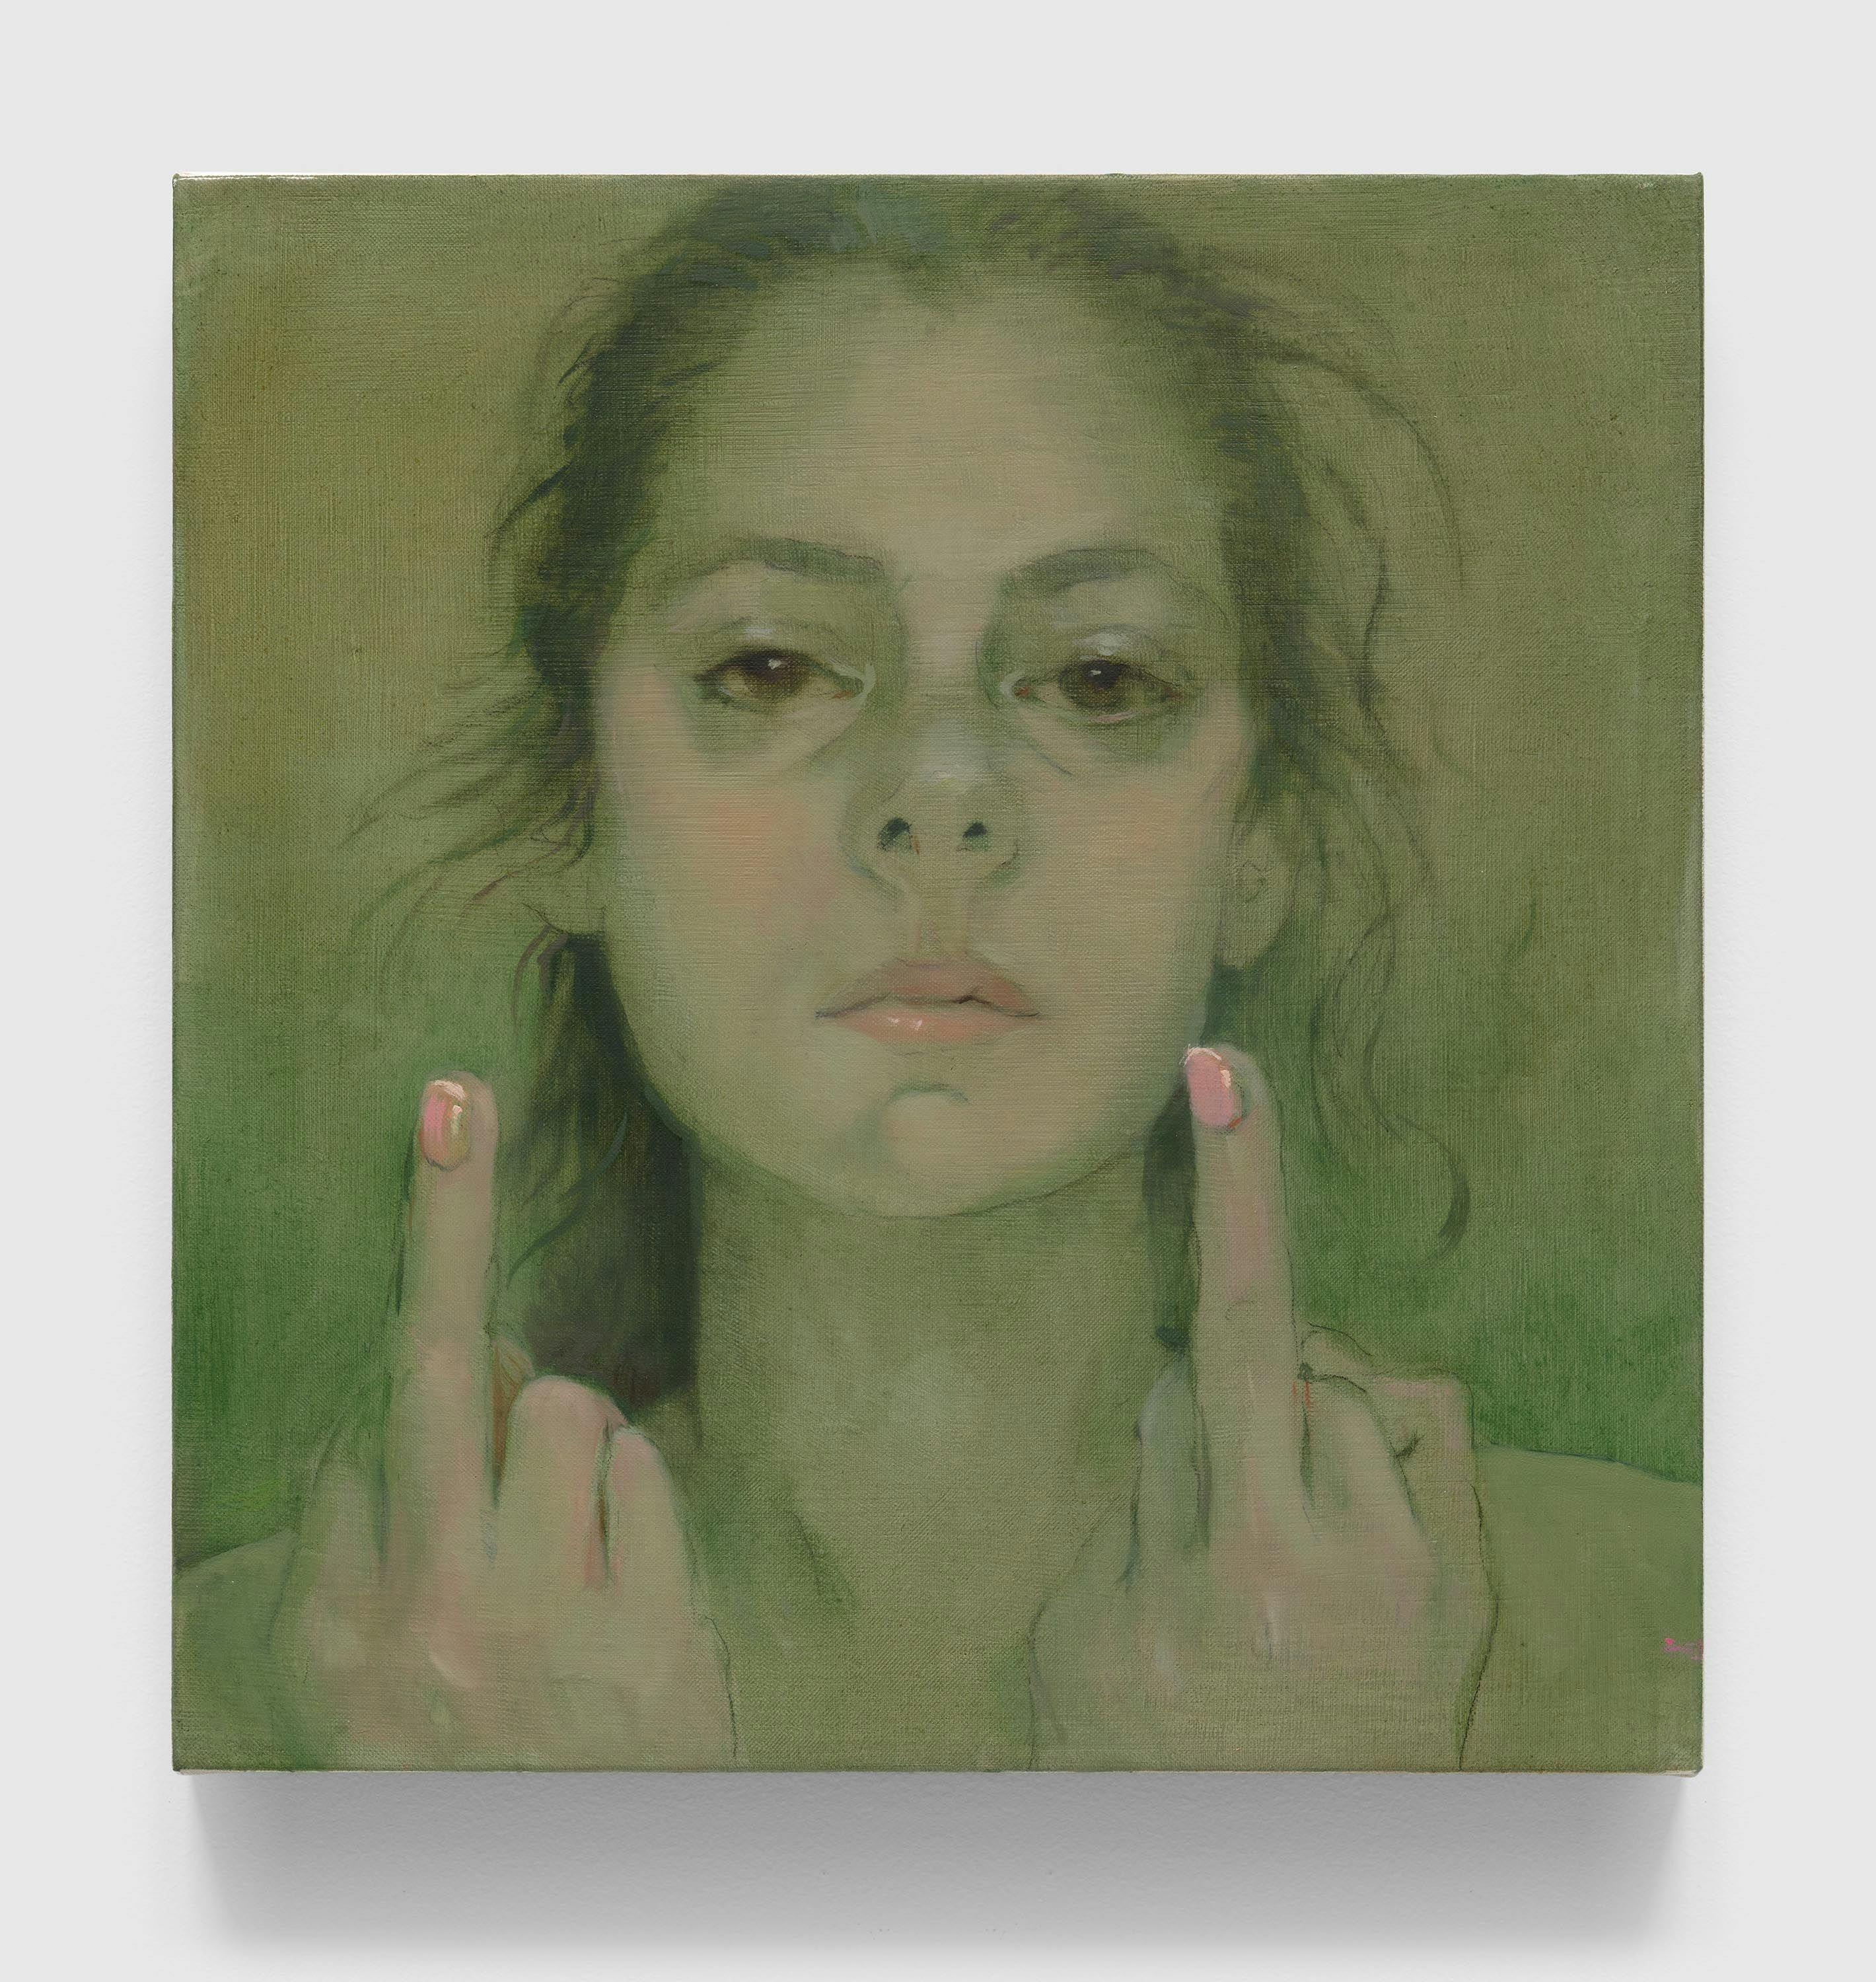 A painting by Lisa Yuskavage, titled The Fuck You Painting, dated 2020.